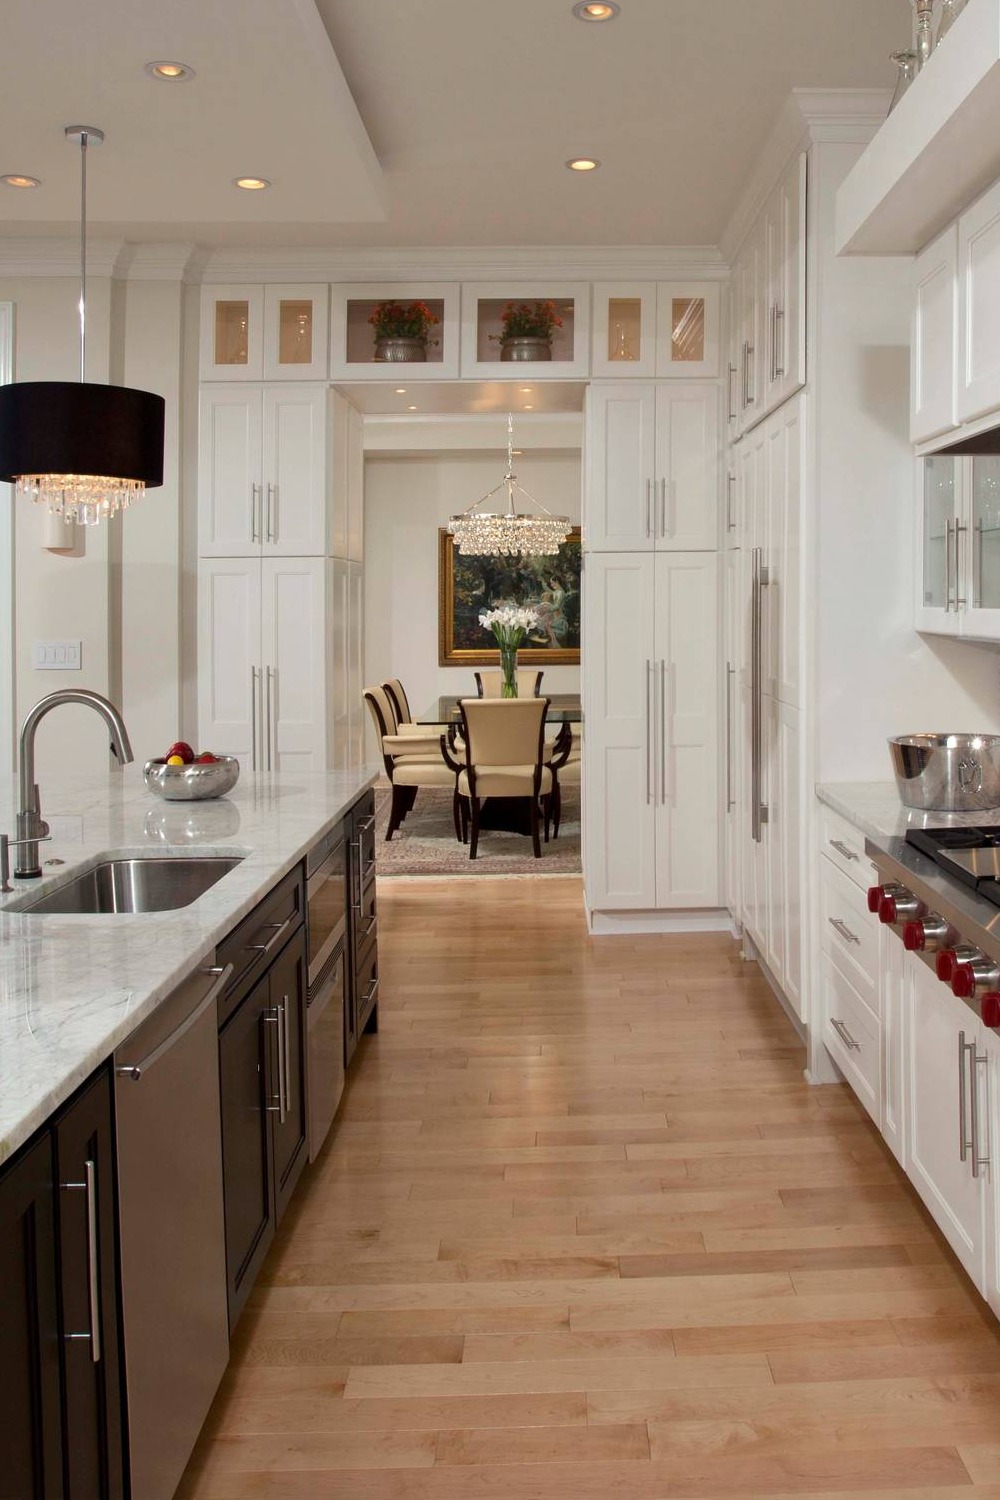 Shaker Wall Cabinets Pantry Cabinets Light Hardwood Flooring White Marble Counters